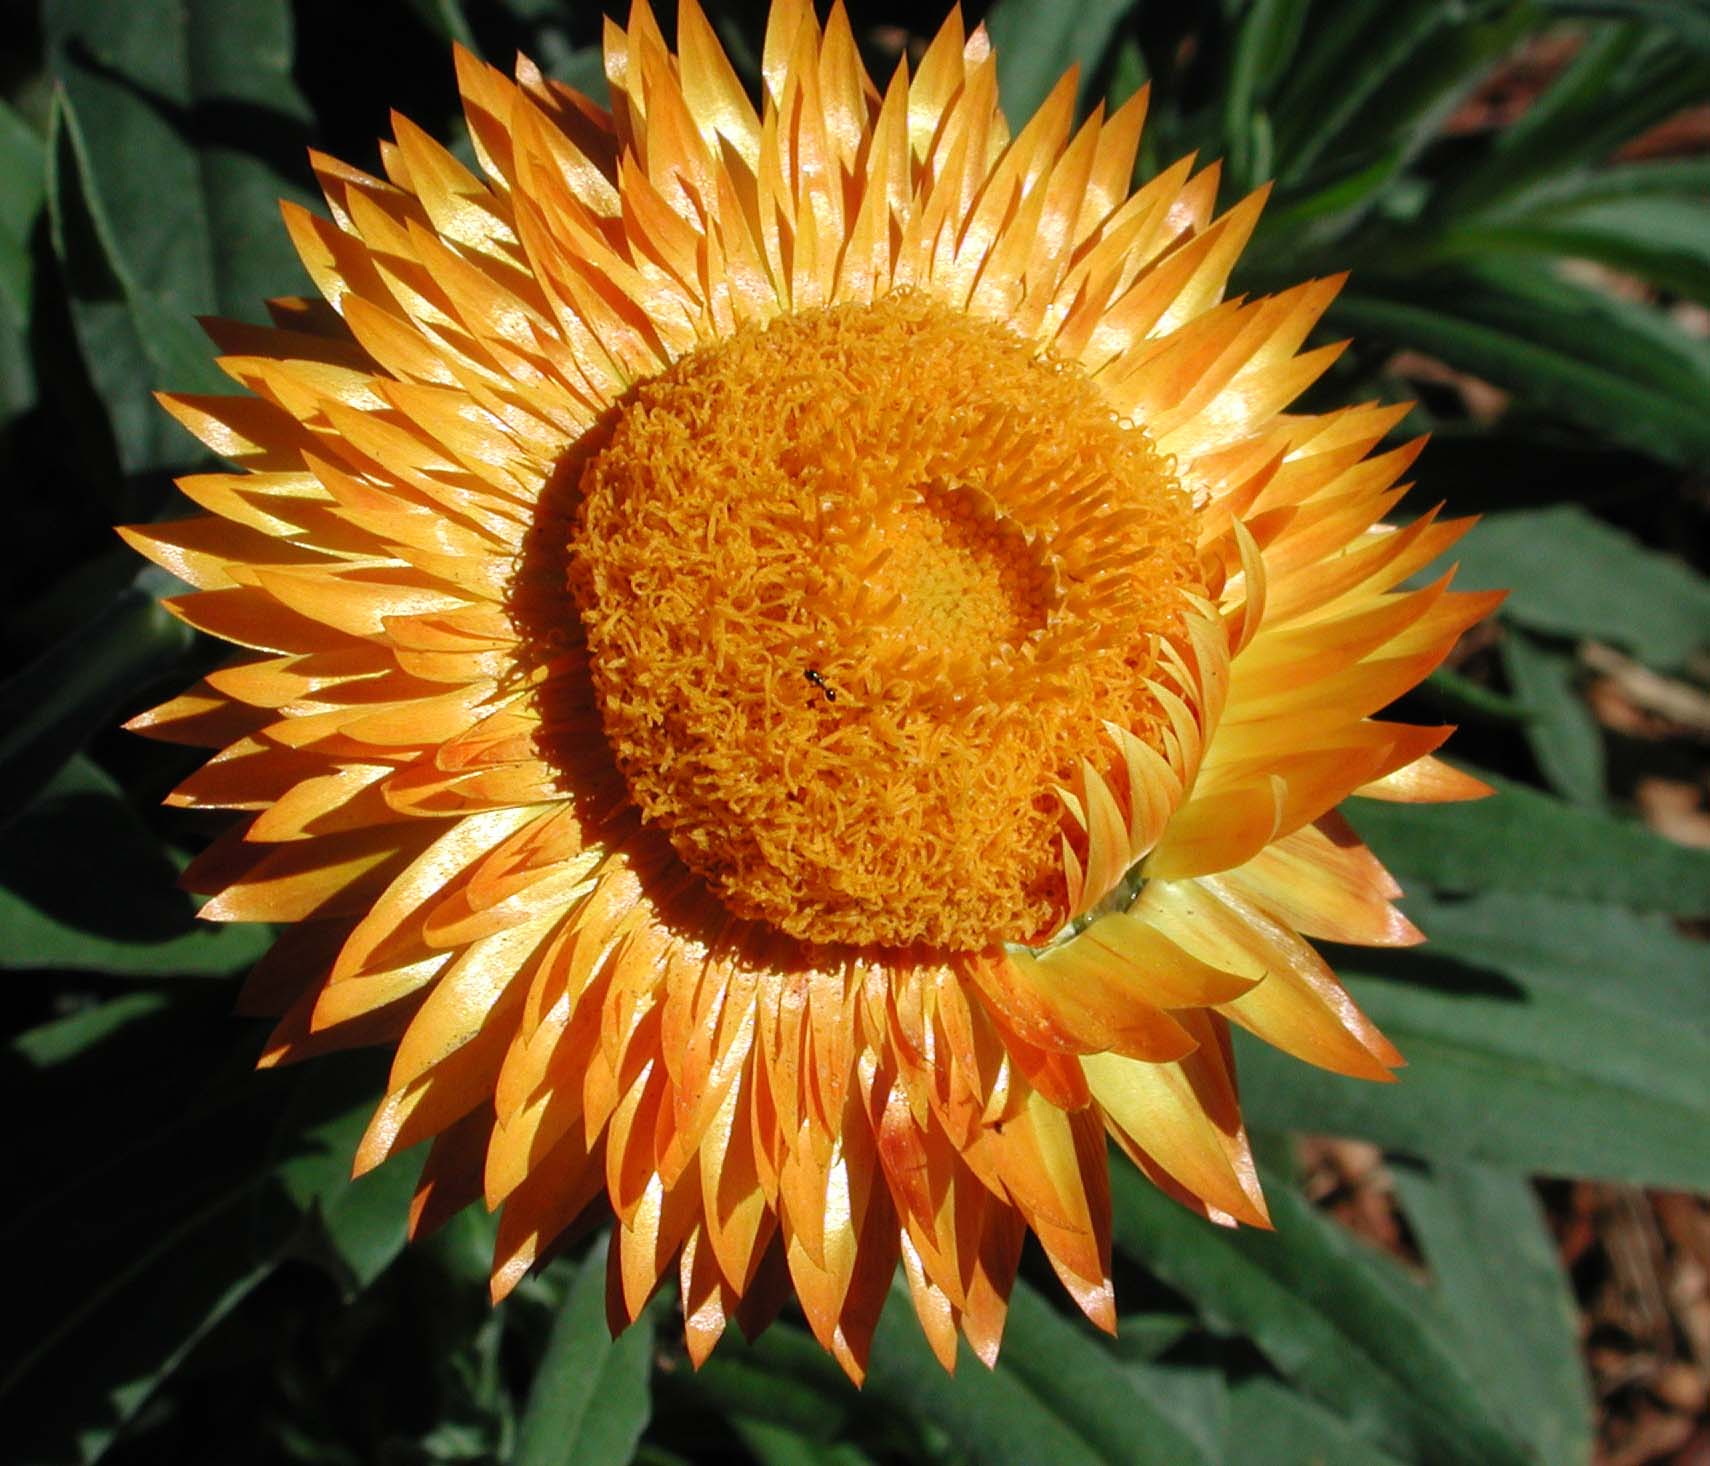 Example of a Daisy flower